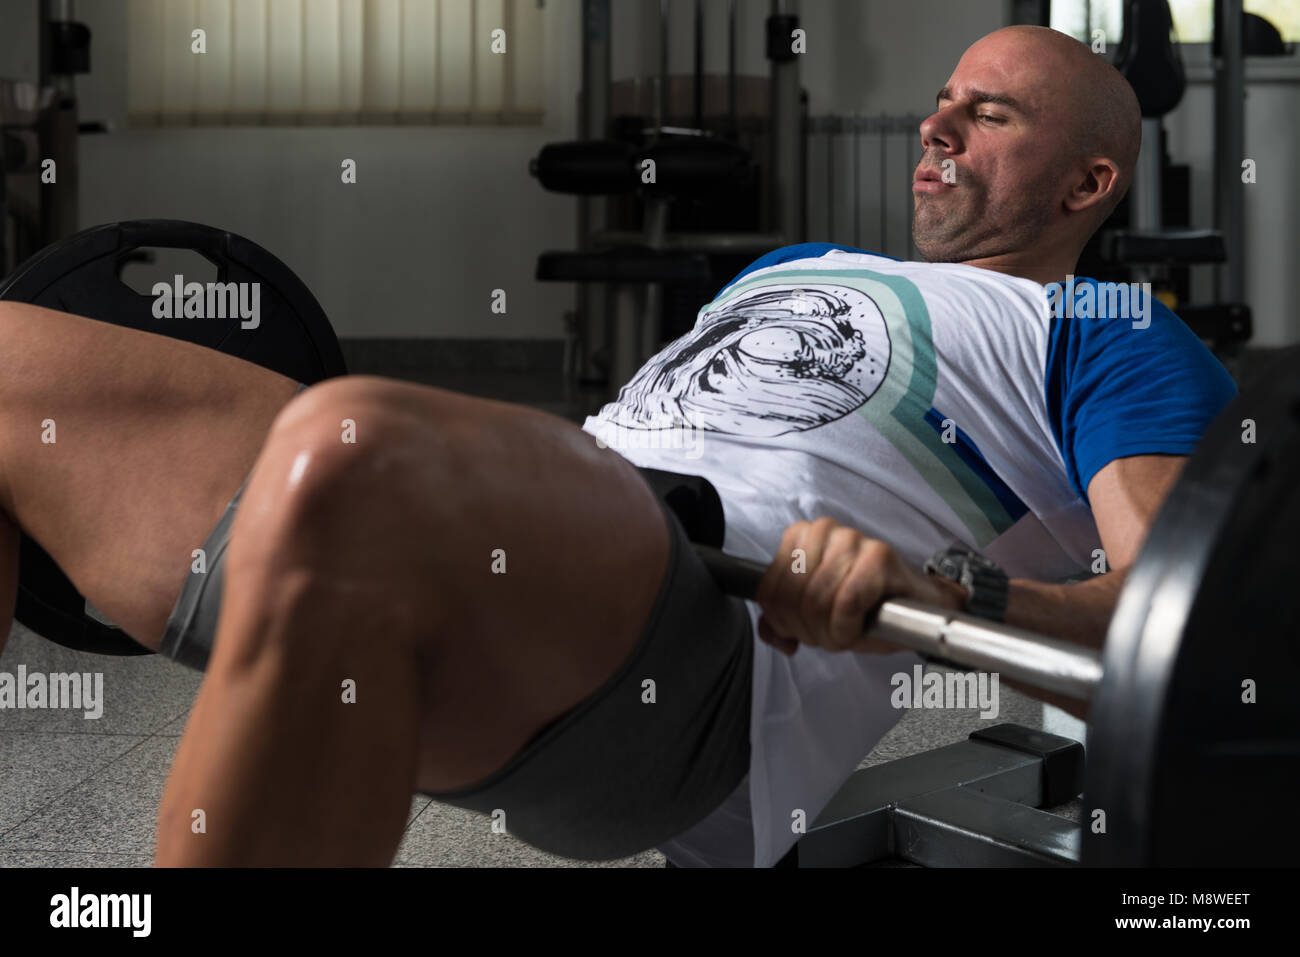 Strong Man In The Gym Exercising Hamstrings With Barbell - Muscular Athletic Bodybuilder Fitness Model Exercise Stock Photo